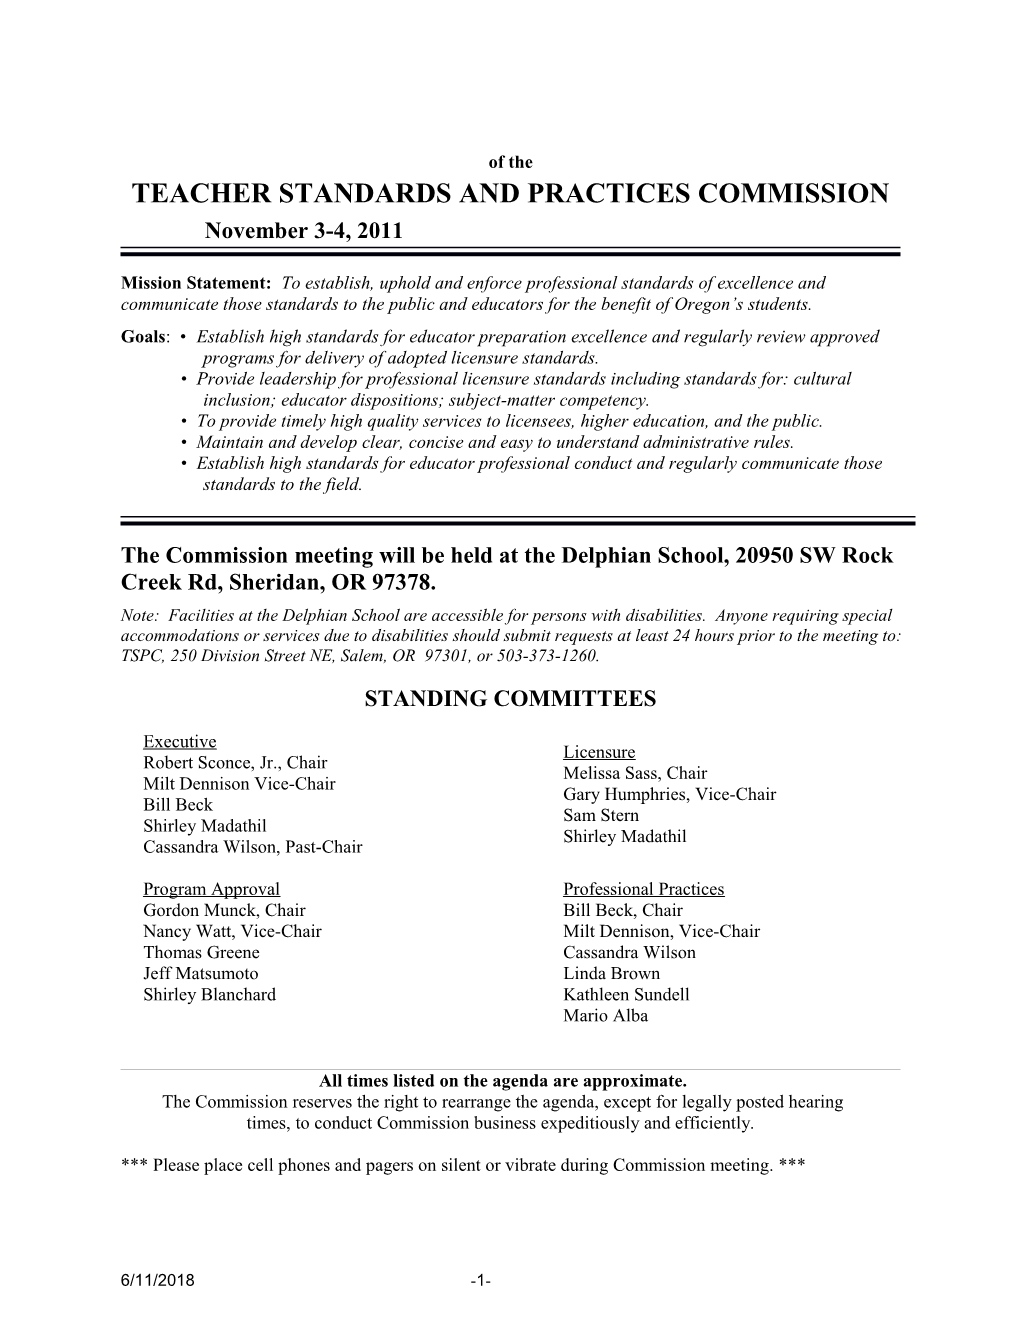 Teacher Standards and Practices Commission s2